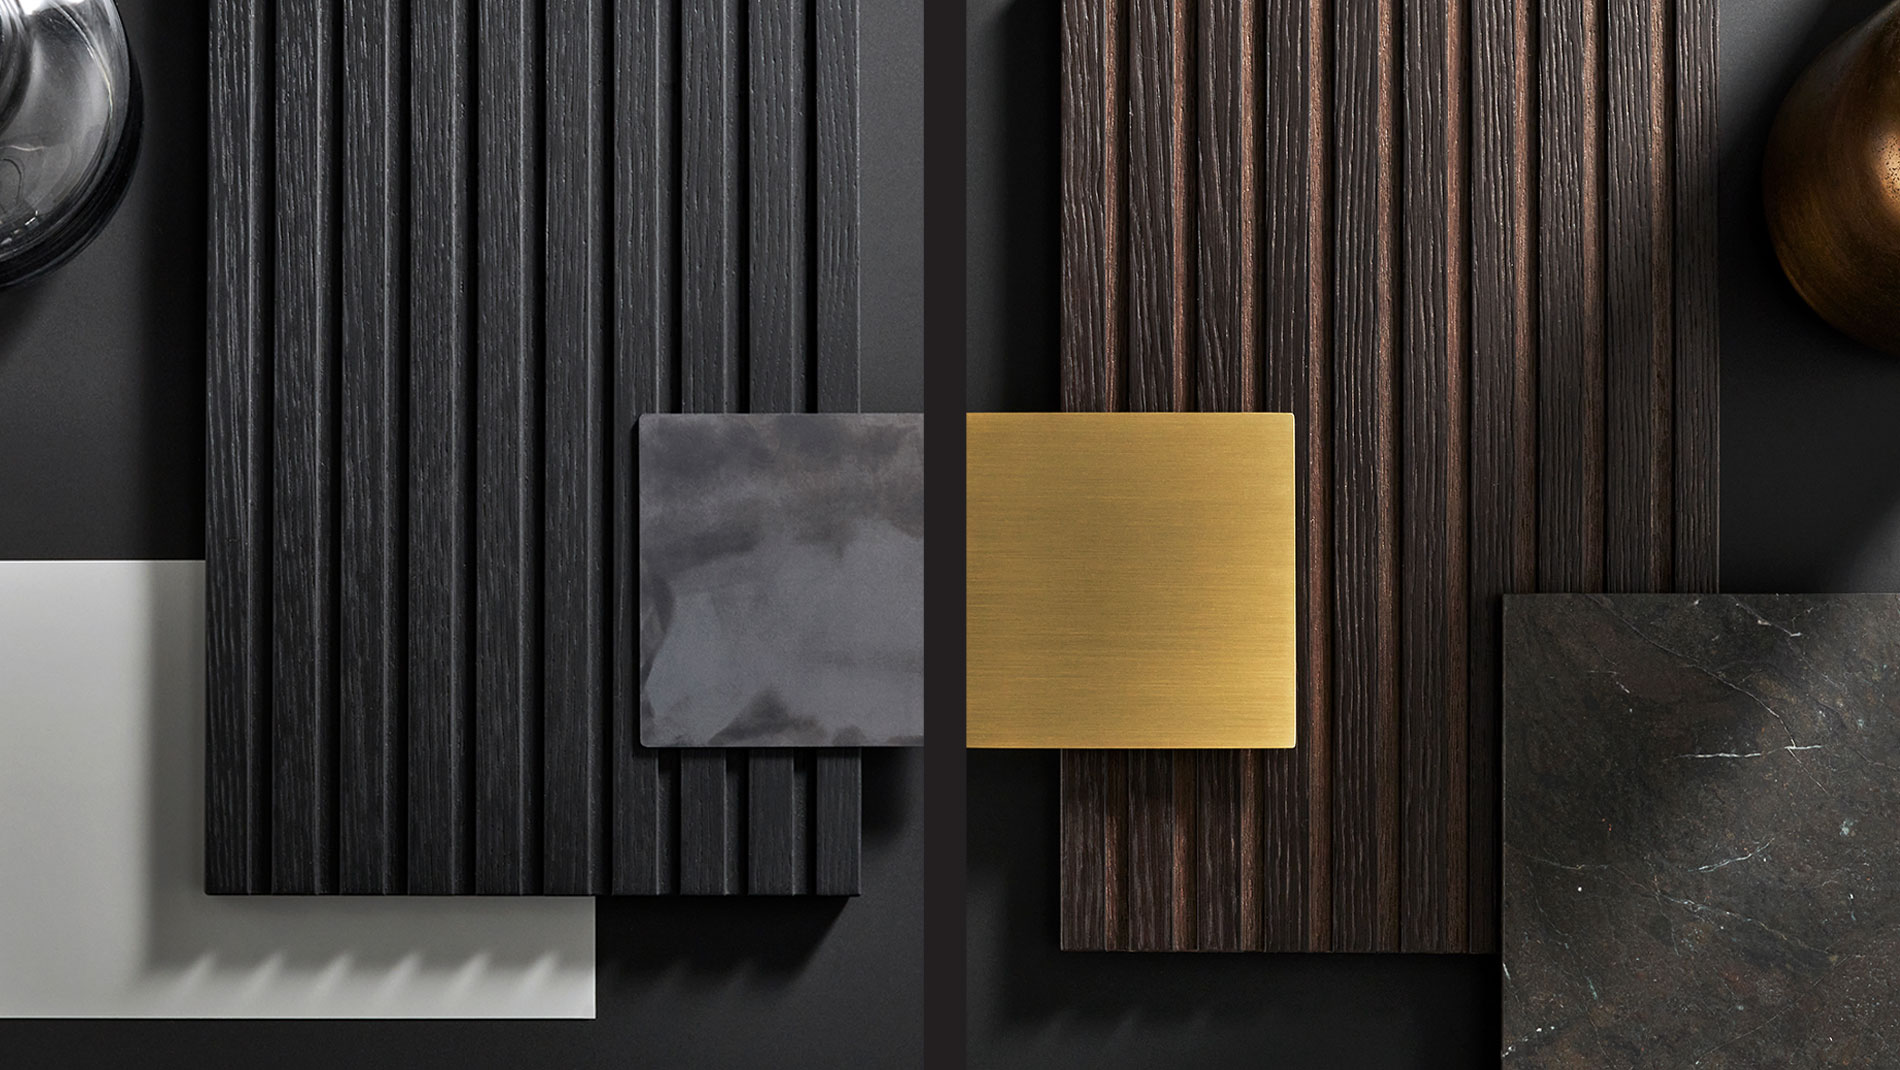 Using various composite materials to create a consistent theme